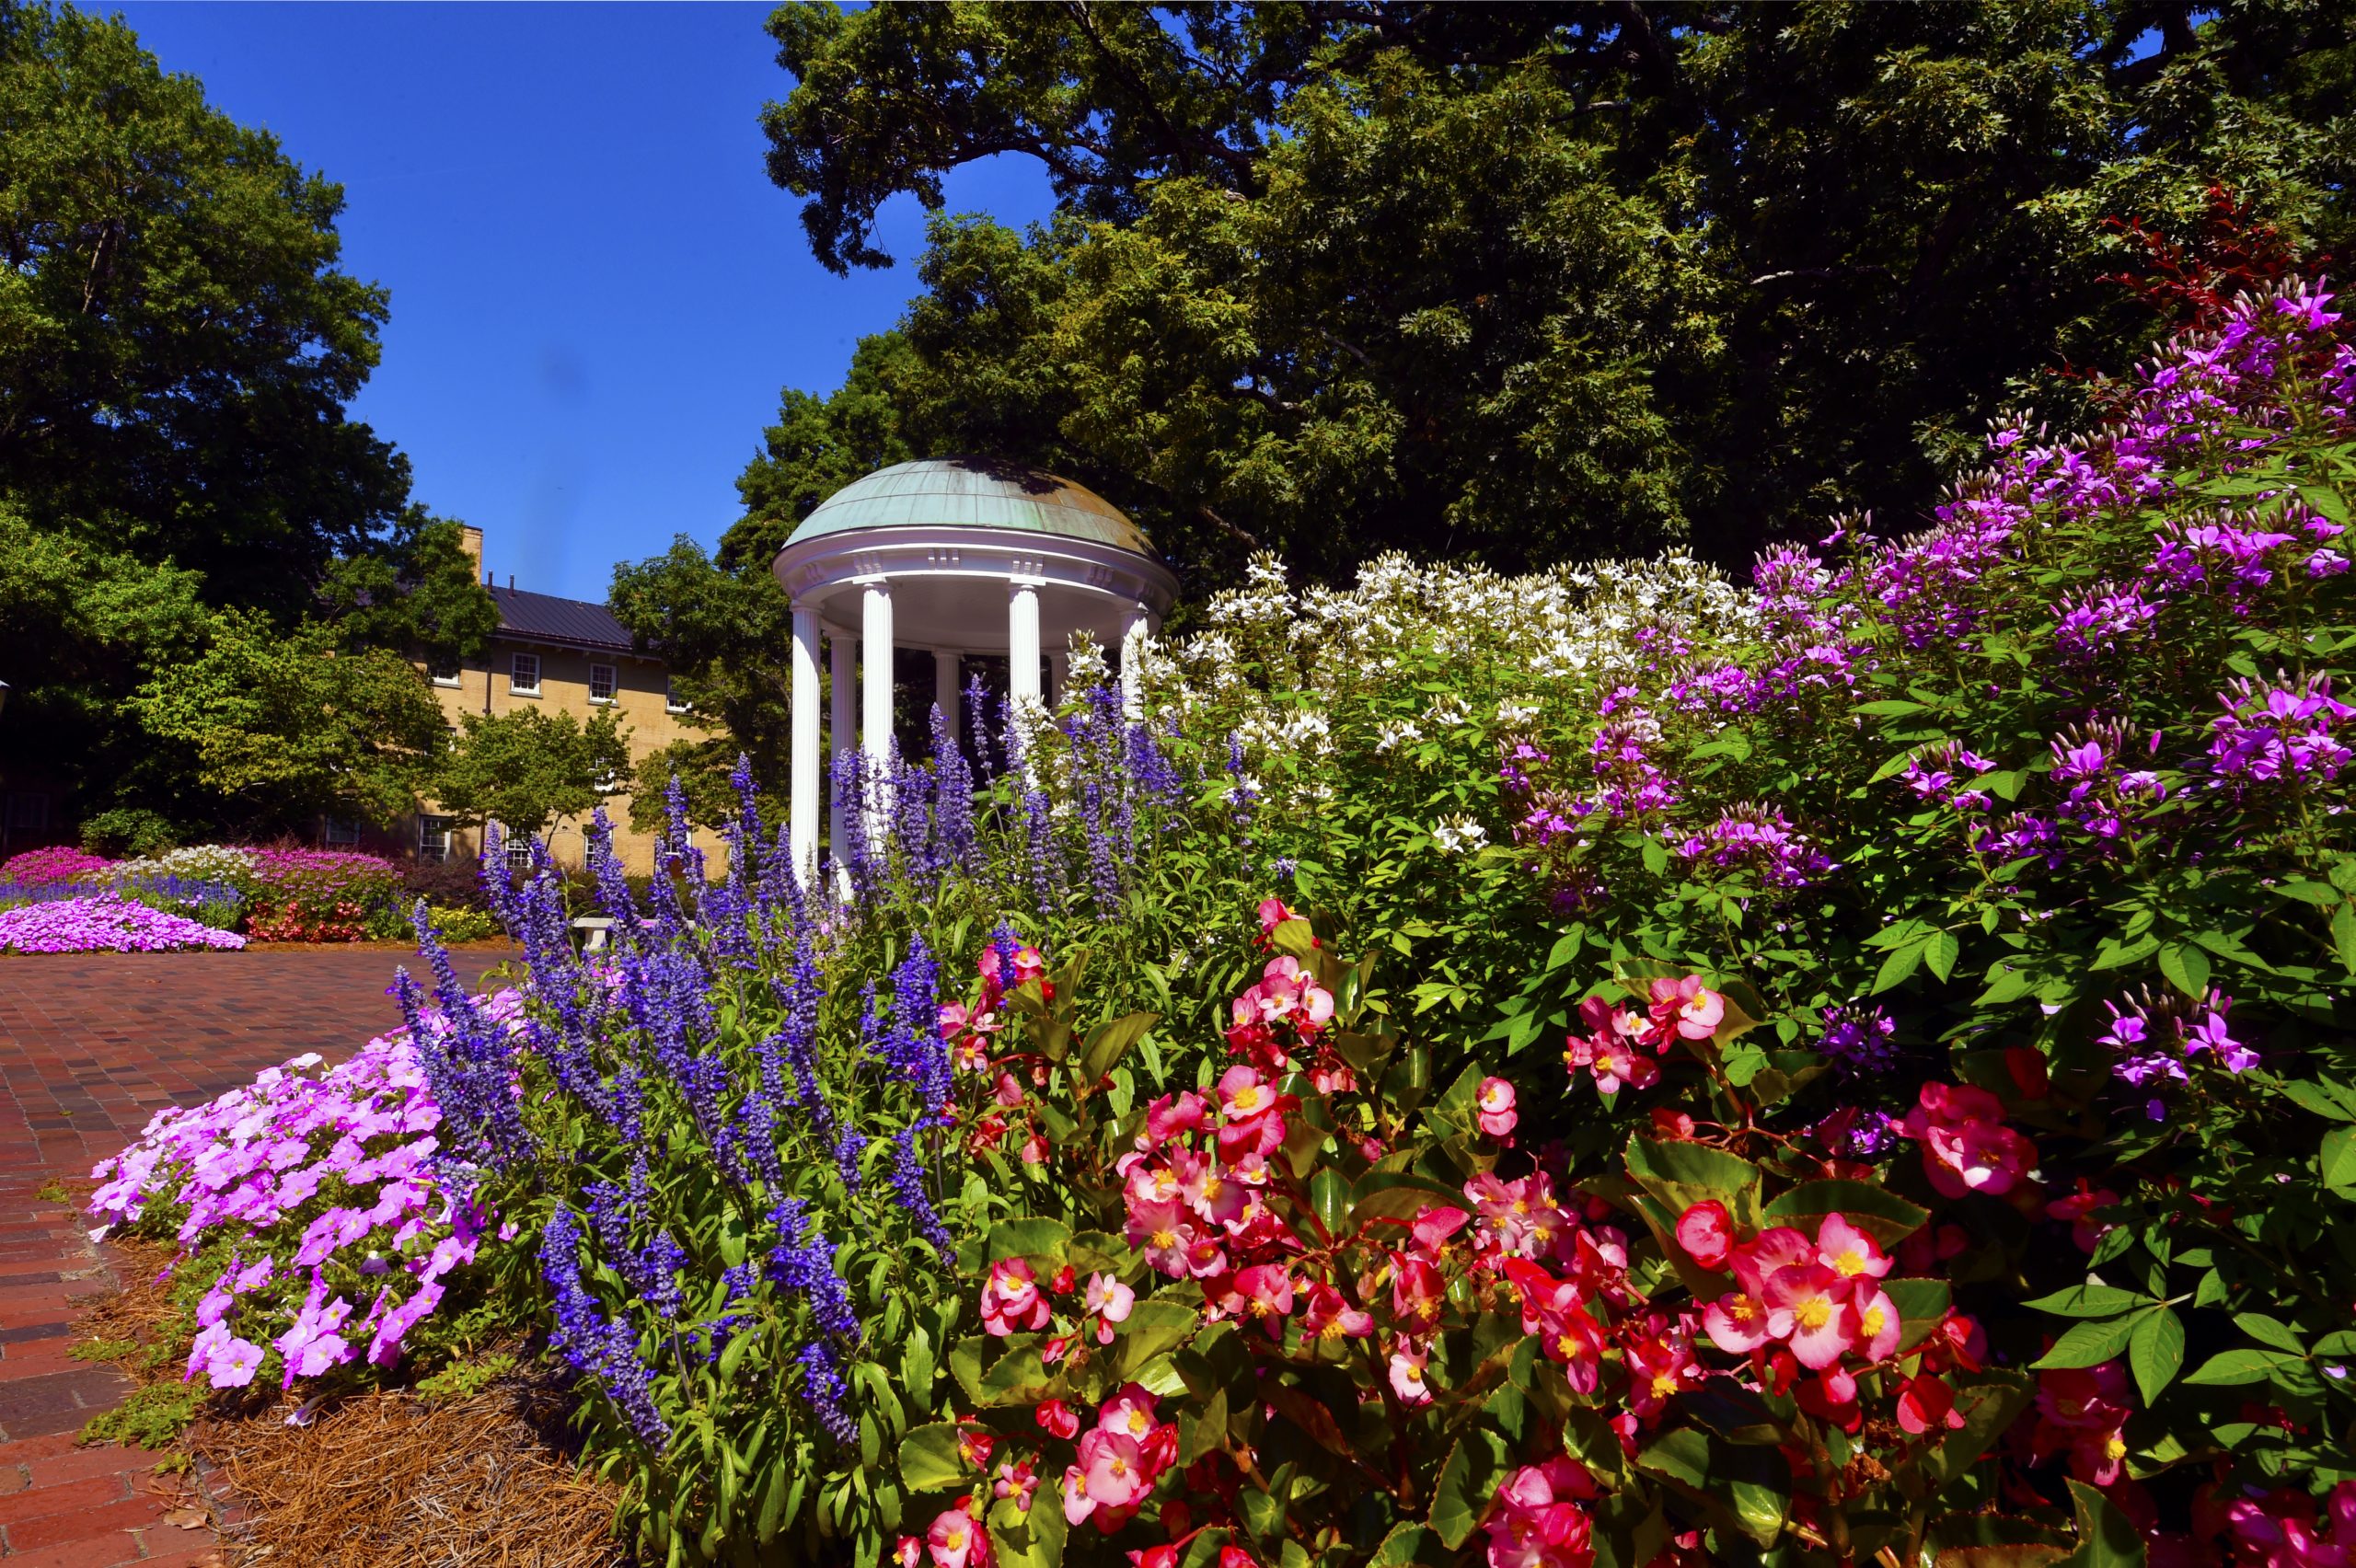 Summer image of the Old Well with colorful flowers in the foreground.